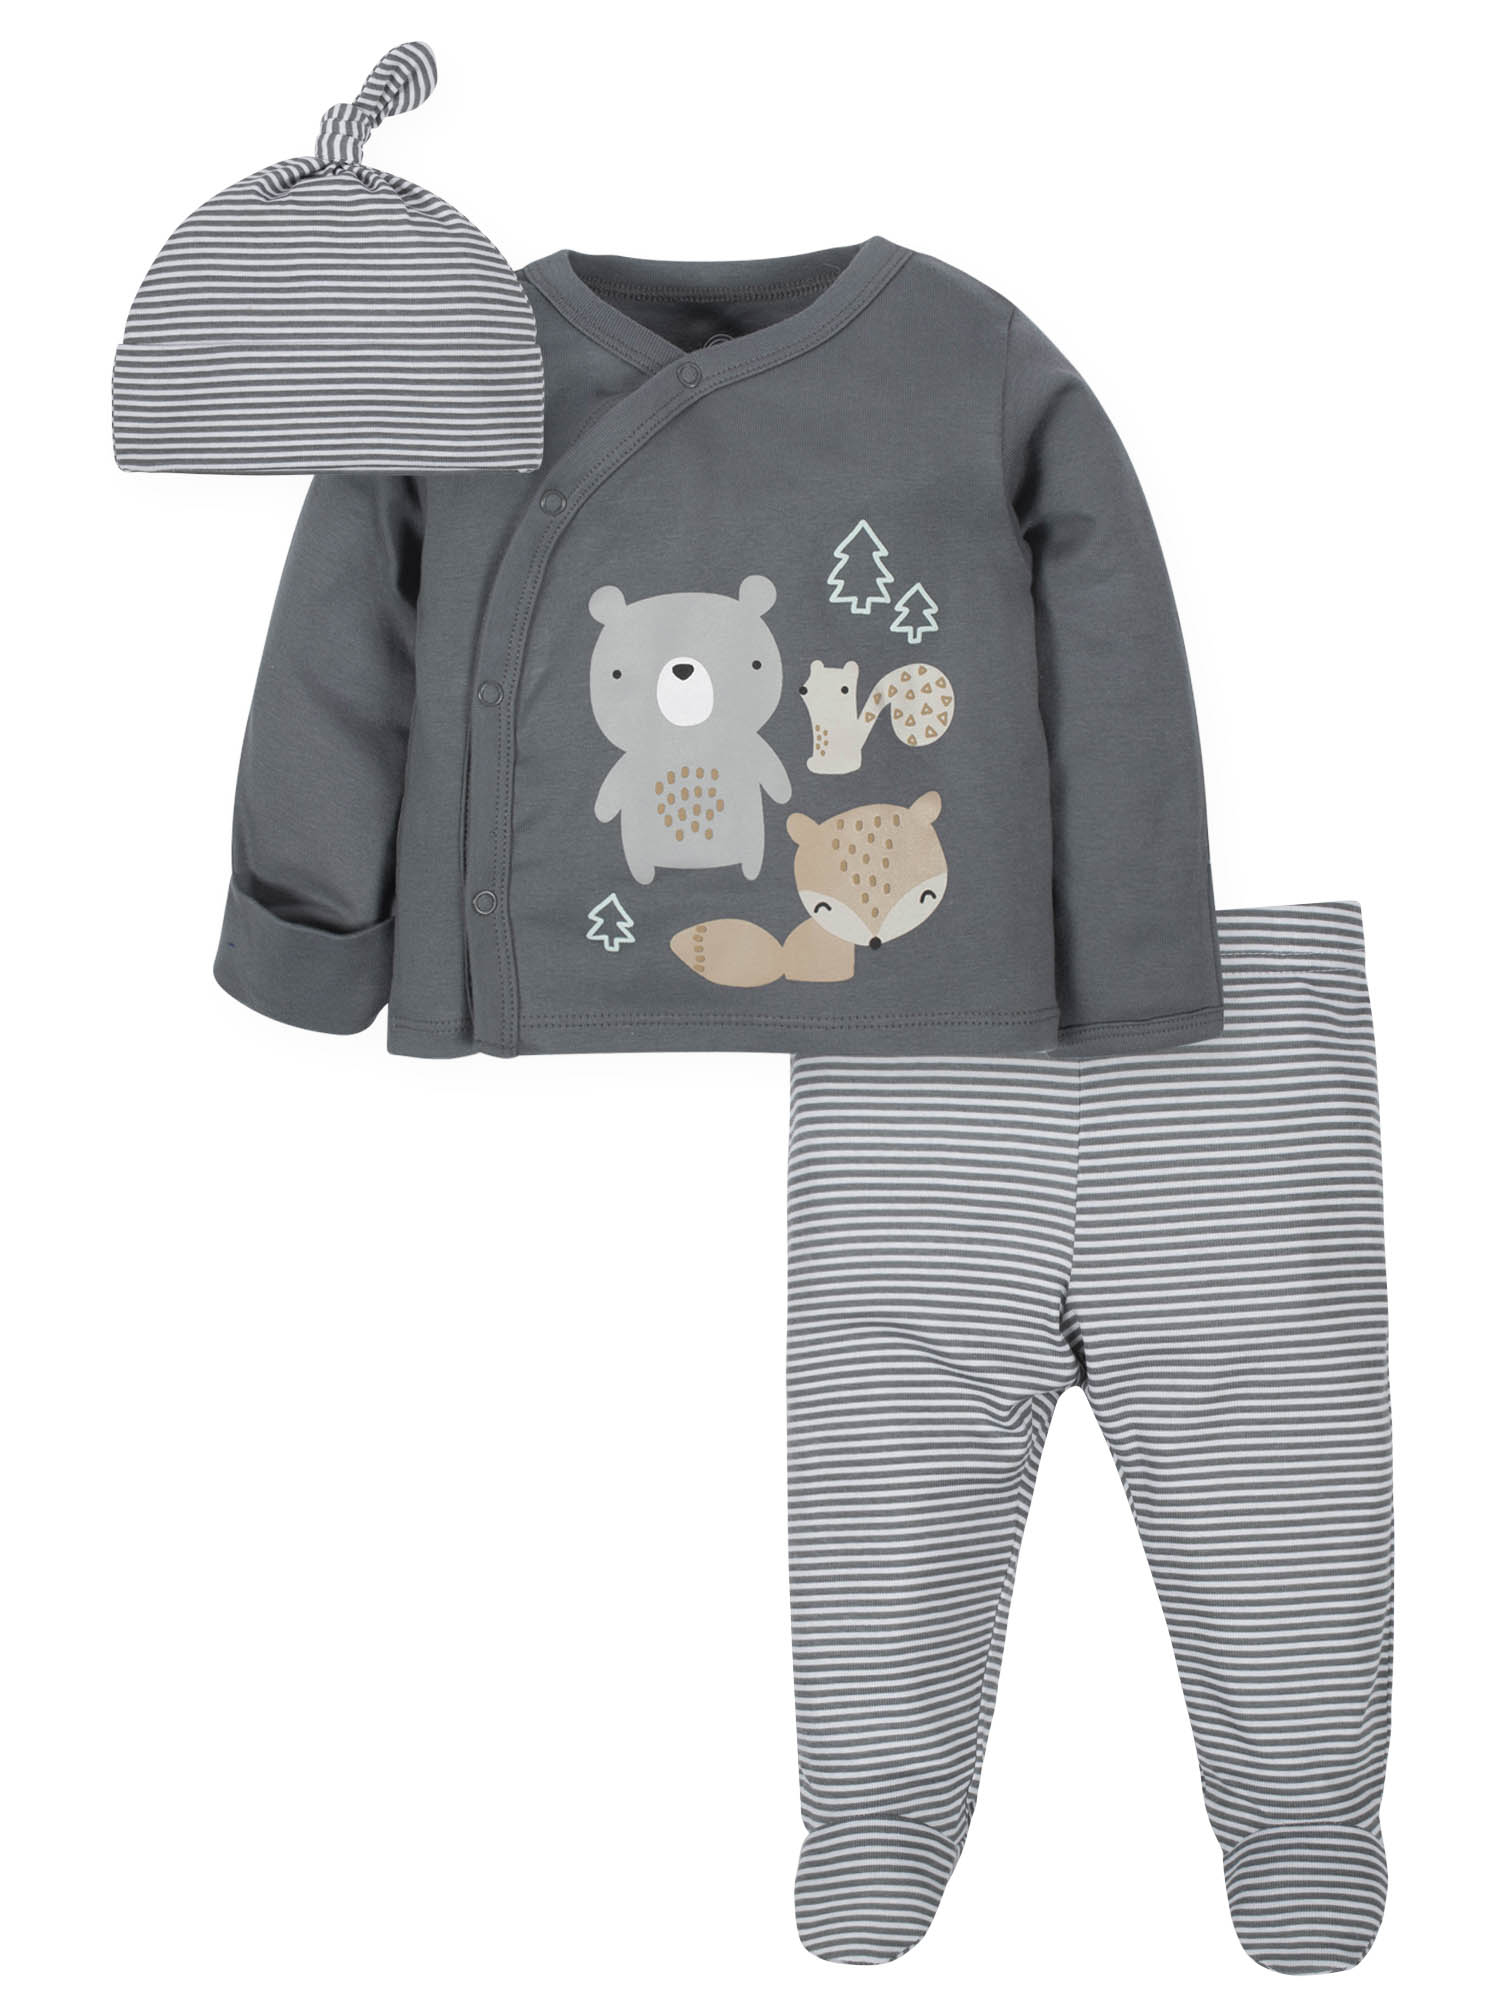 Wonder Nation Baby Boy Take Me Home Outfit Set, 3-Piece (Preemie - 6/9M) - image 1 of 8